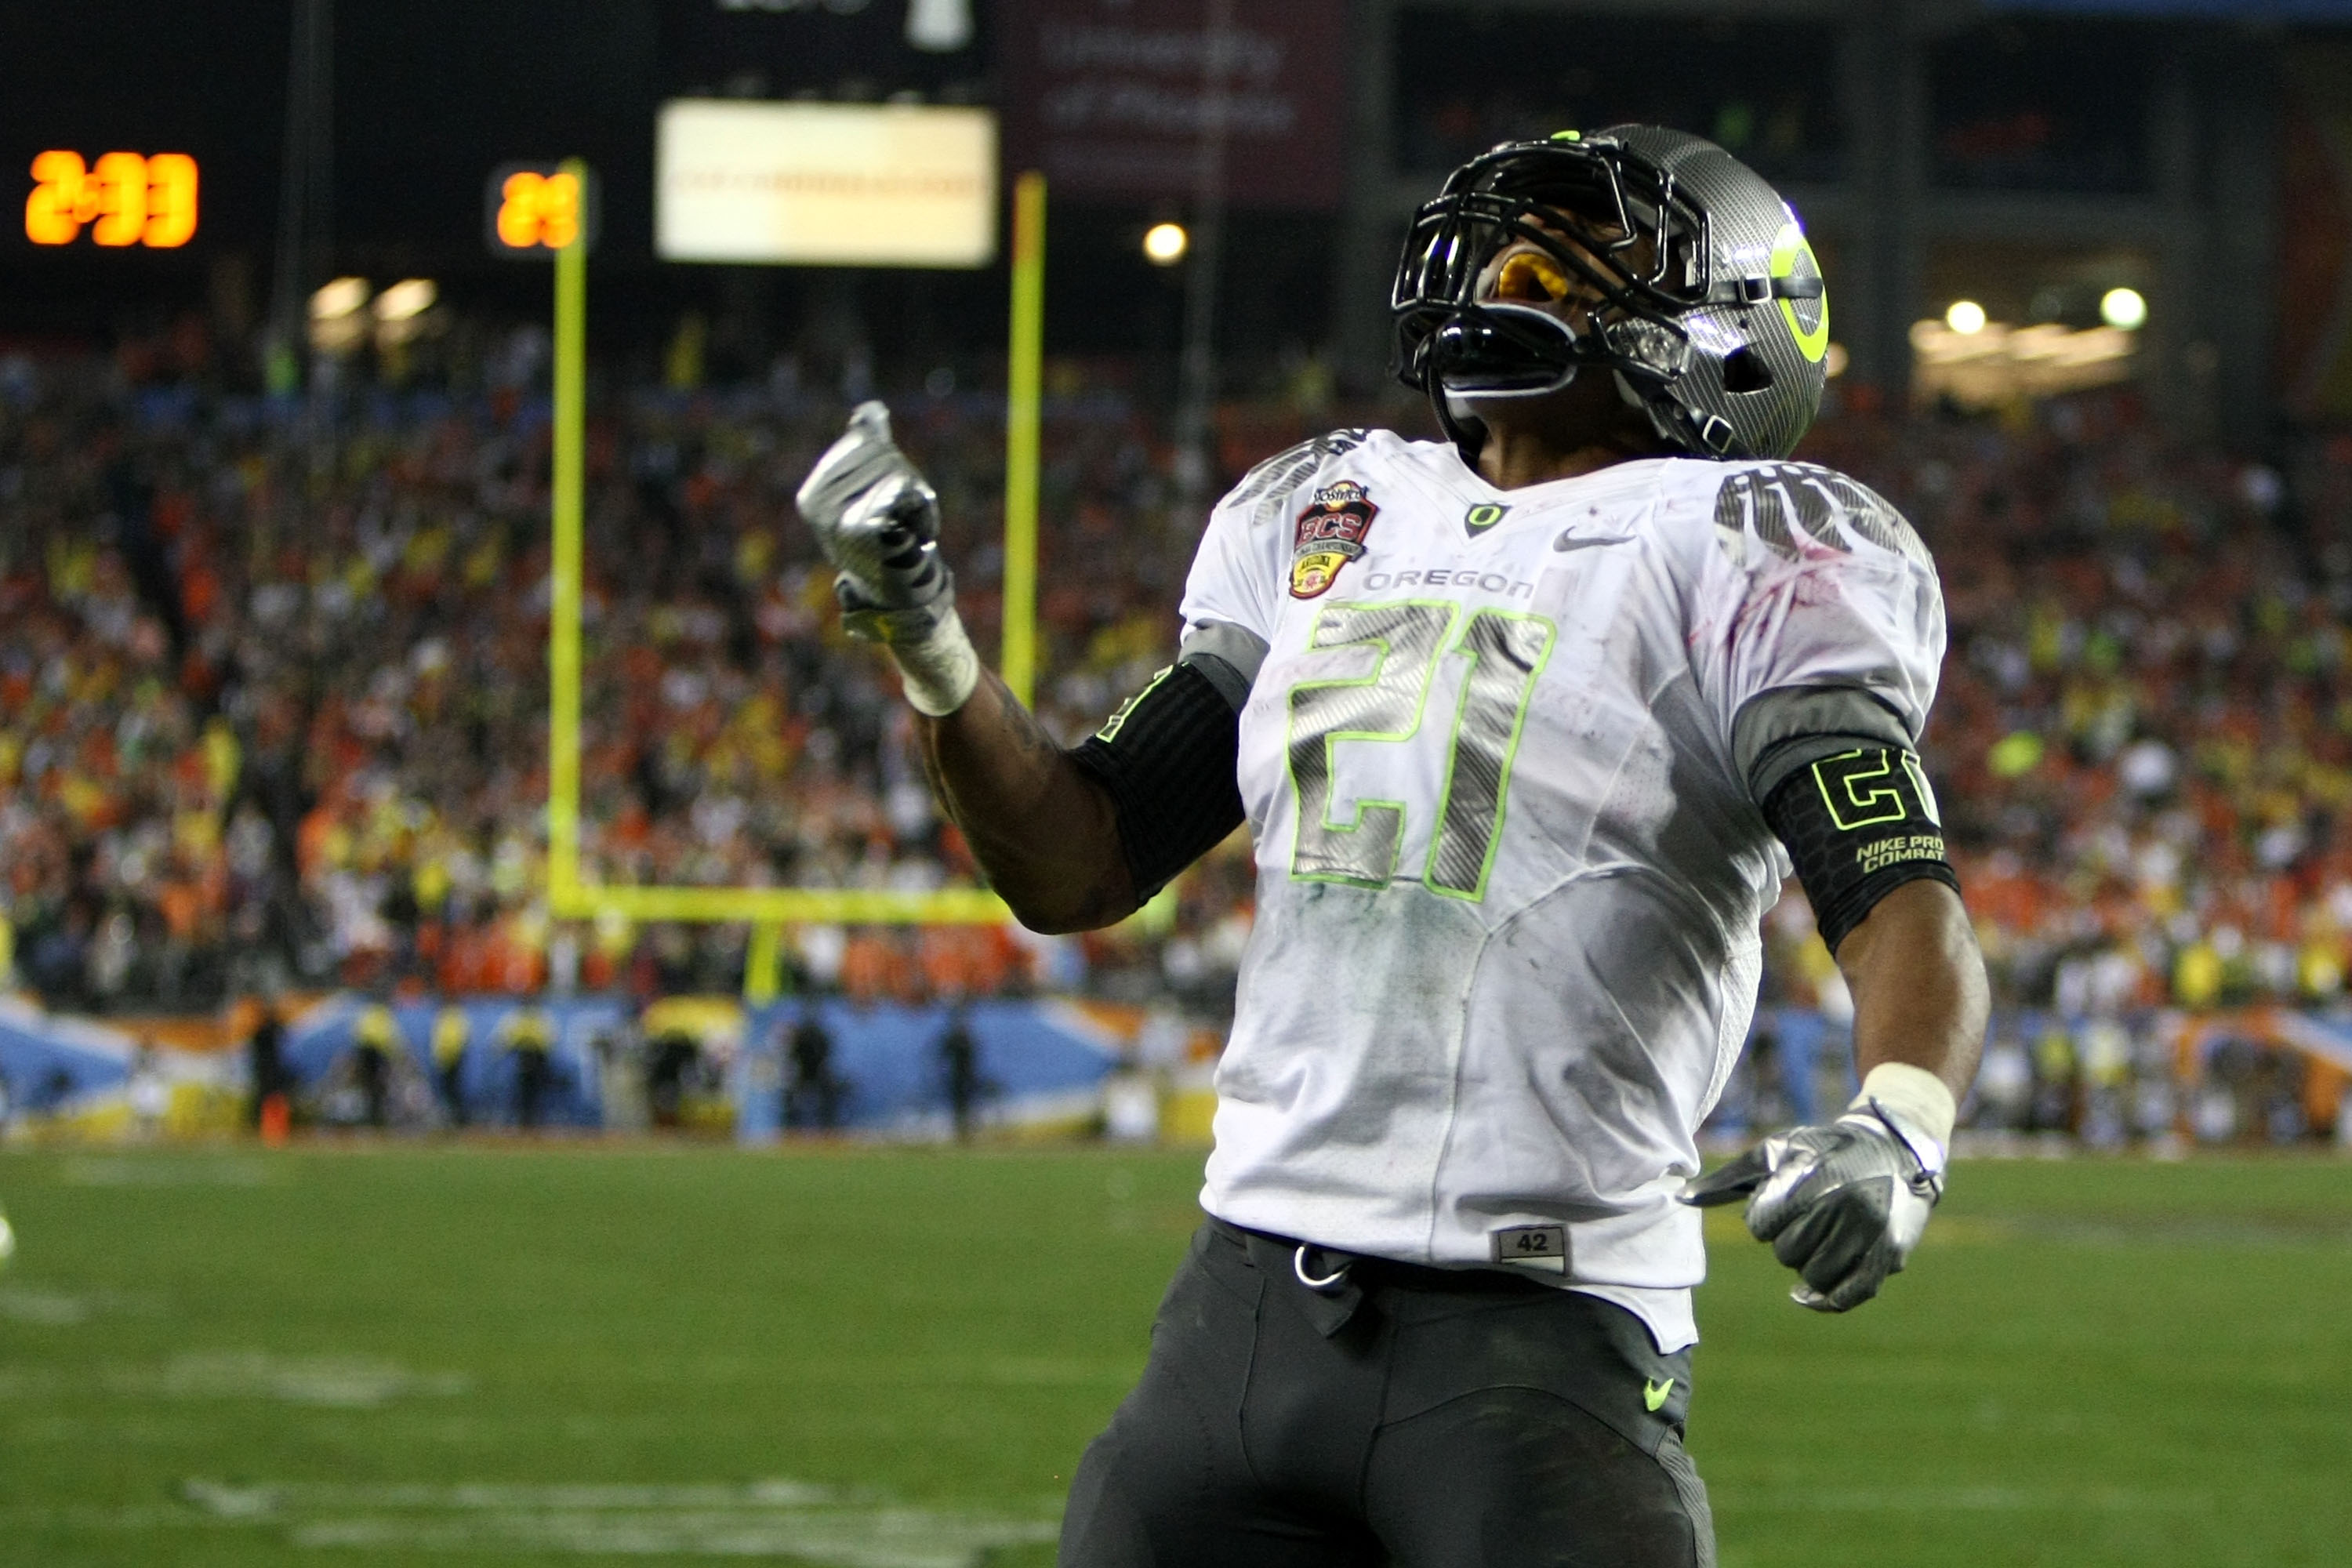 Jan. 10, 2011 - Glendale, Arizona, U.S - Oregon Ducks running back  LaMichael James (21) goes in for the score during game action of the BCS  National Championship game, between the #2